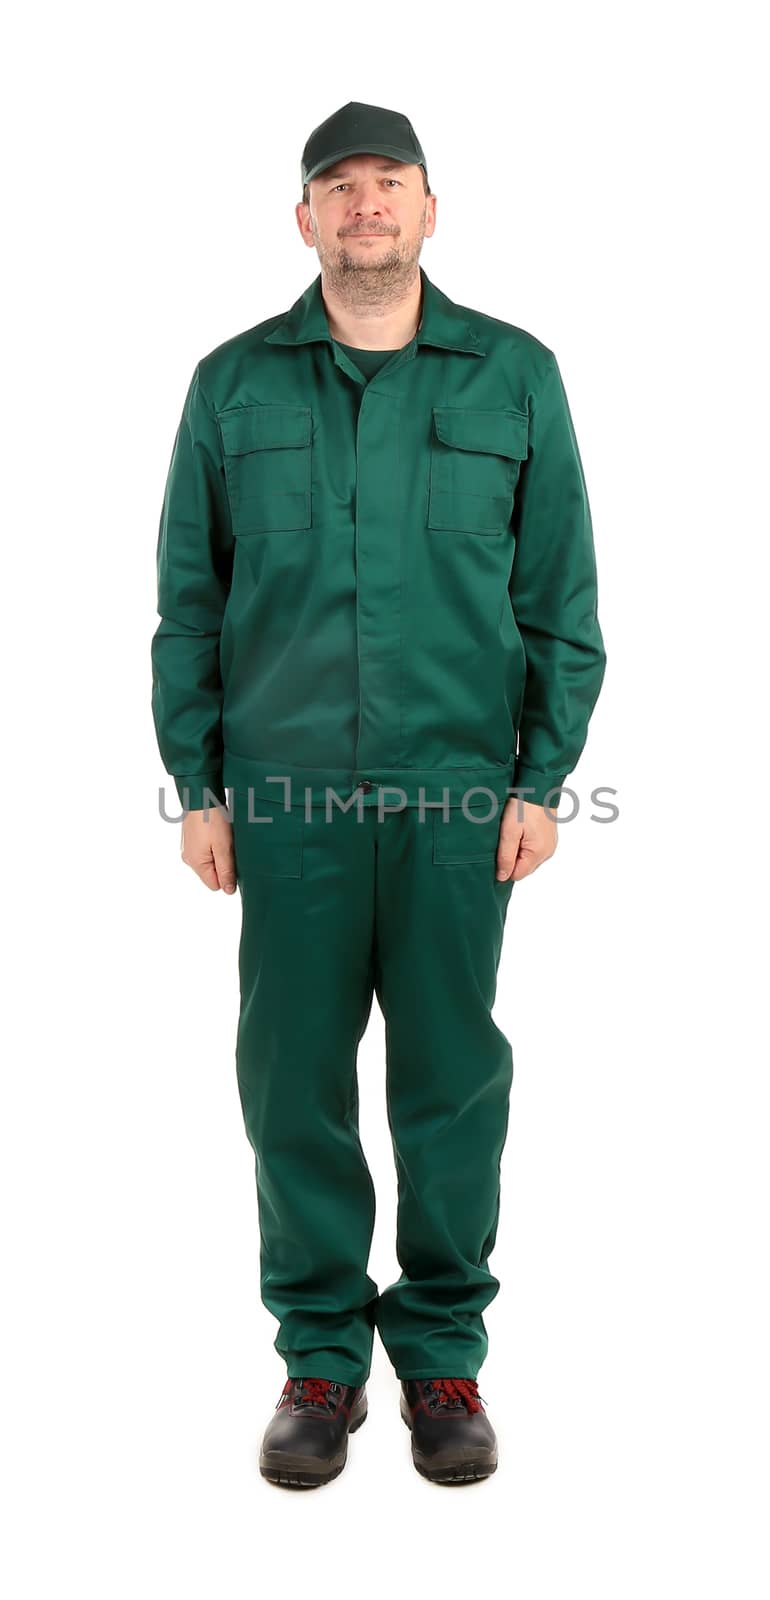 Worker in green workwear. Isolated on a white background.